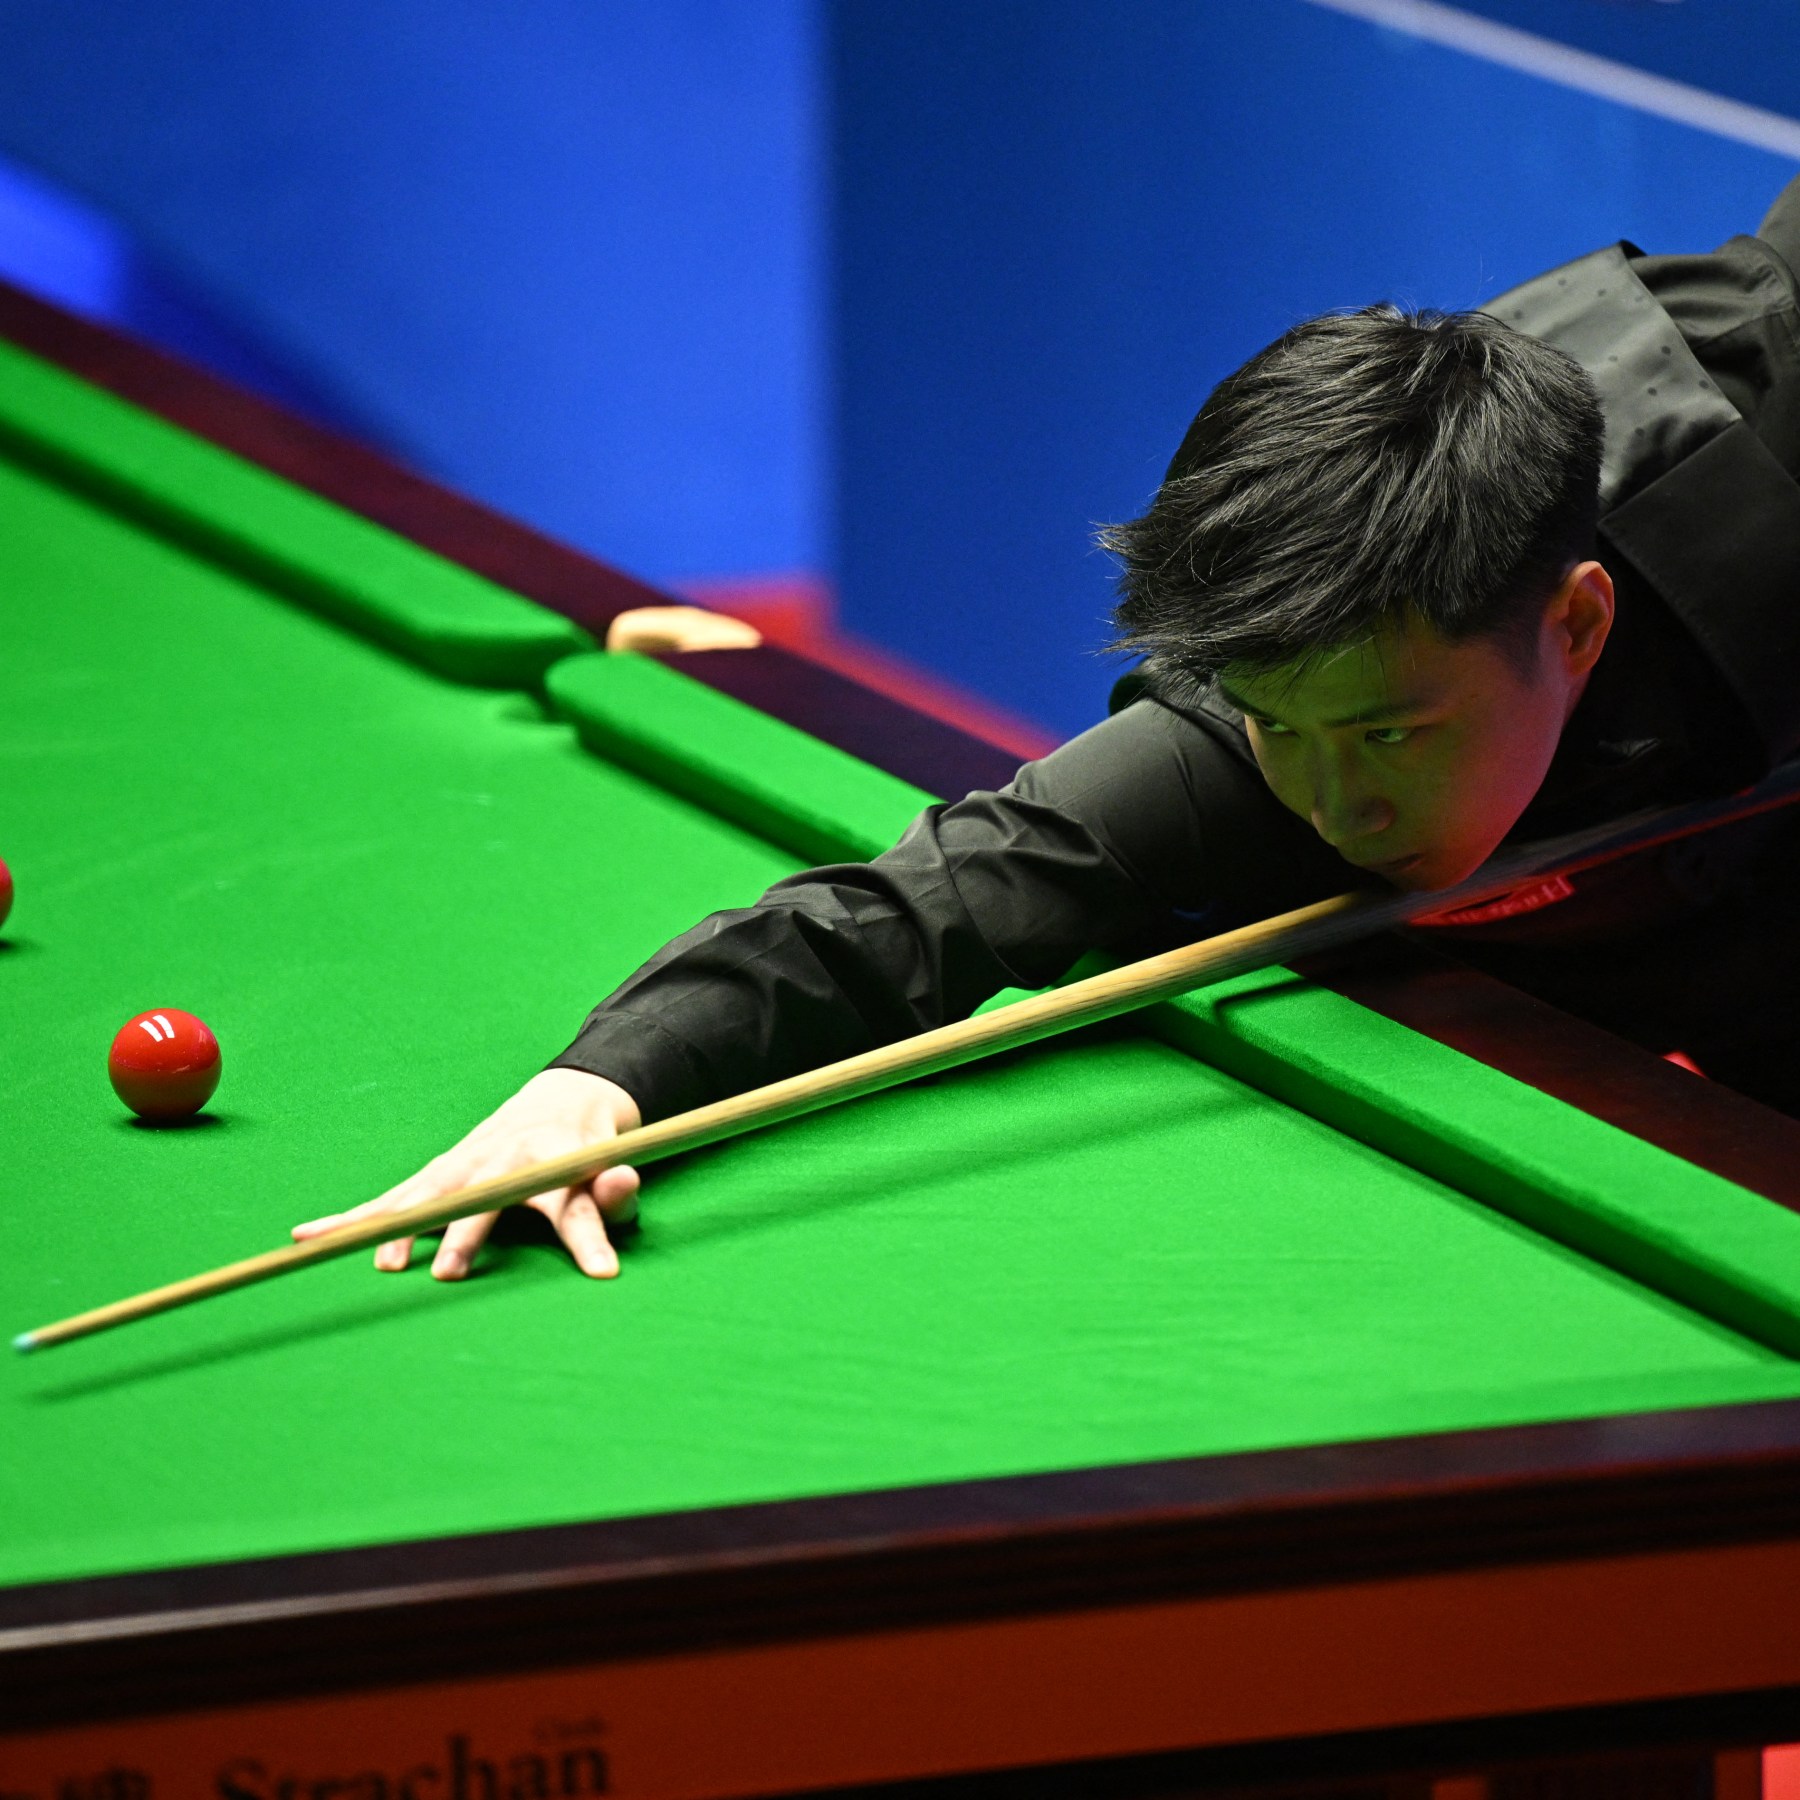 Ten Chinese snooker players hit with match-fixing charges | News | Al Jazeera